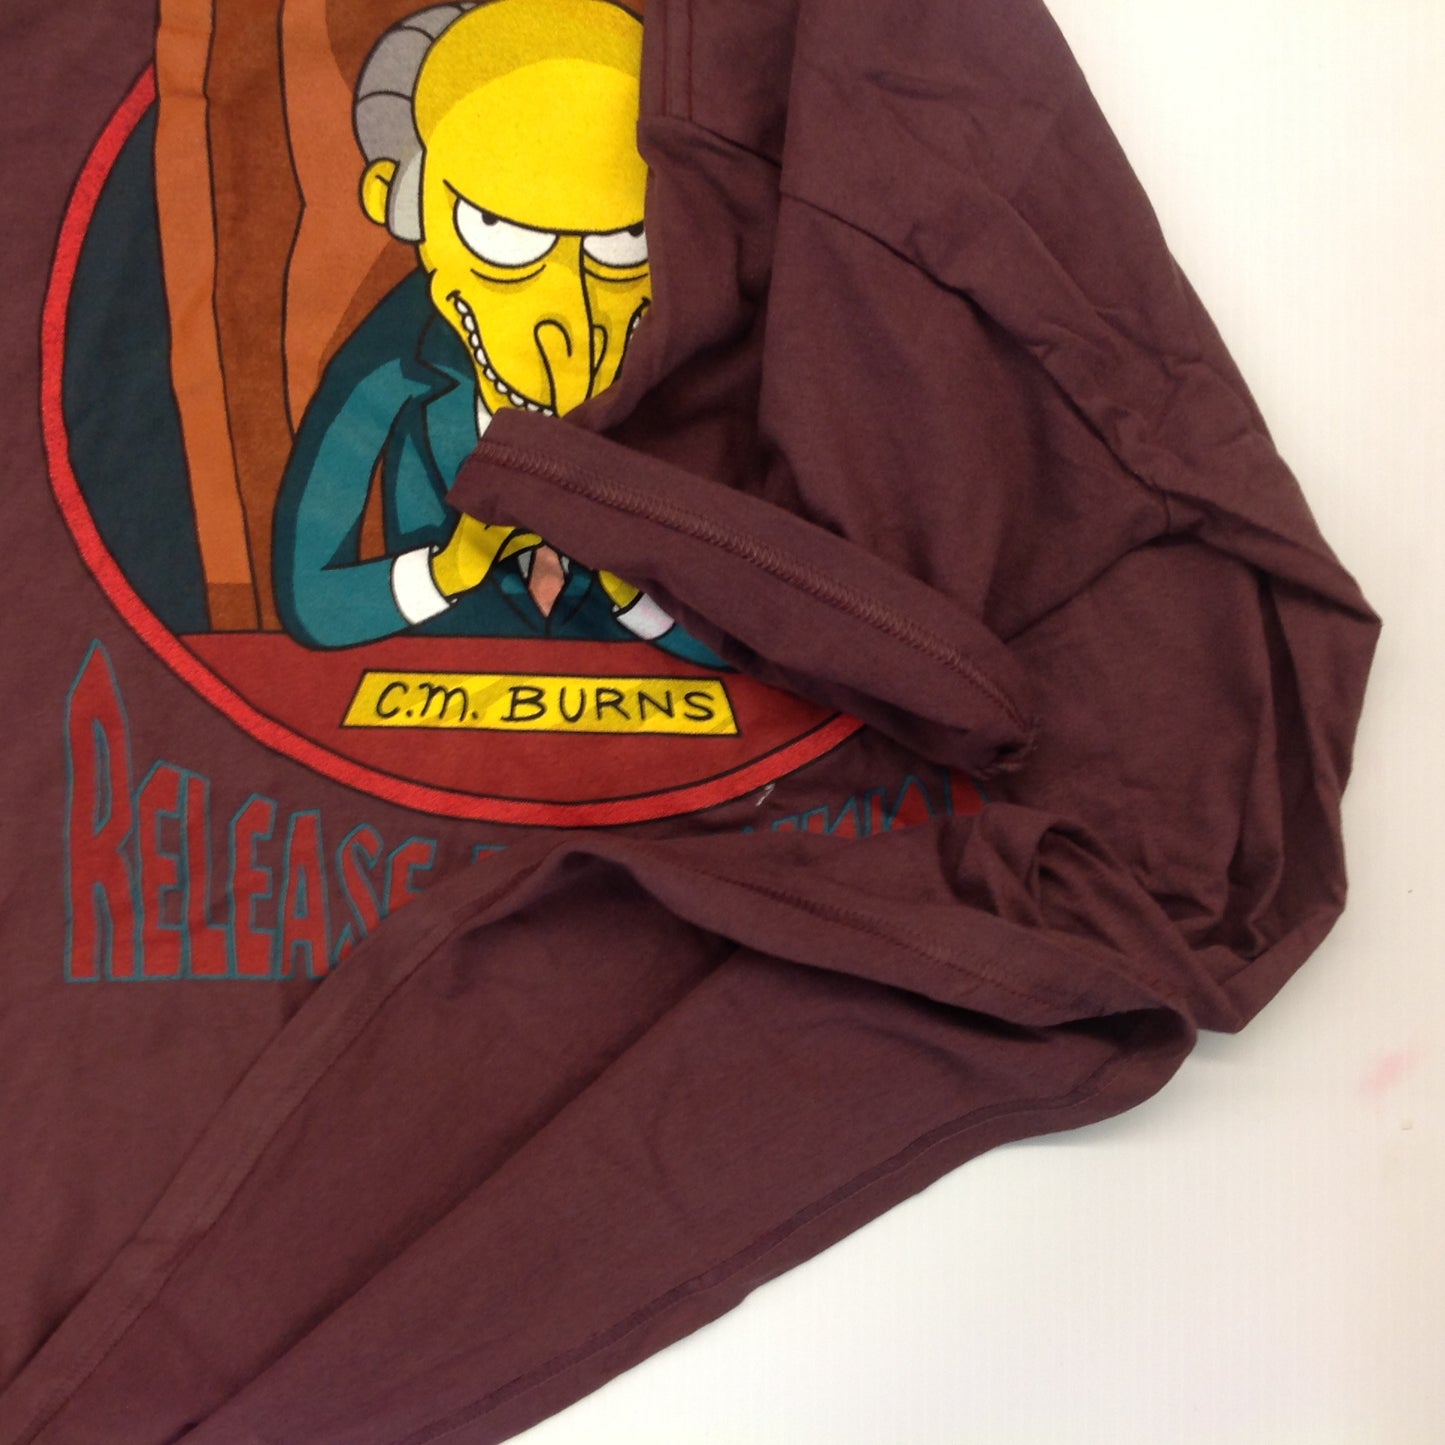 Vintage 1999 Tultex The Simpsons Mr. Burns Release the Hounds XL Brown T-Shirt